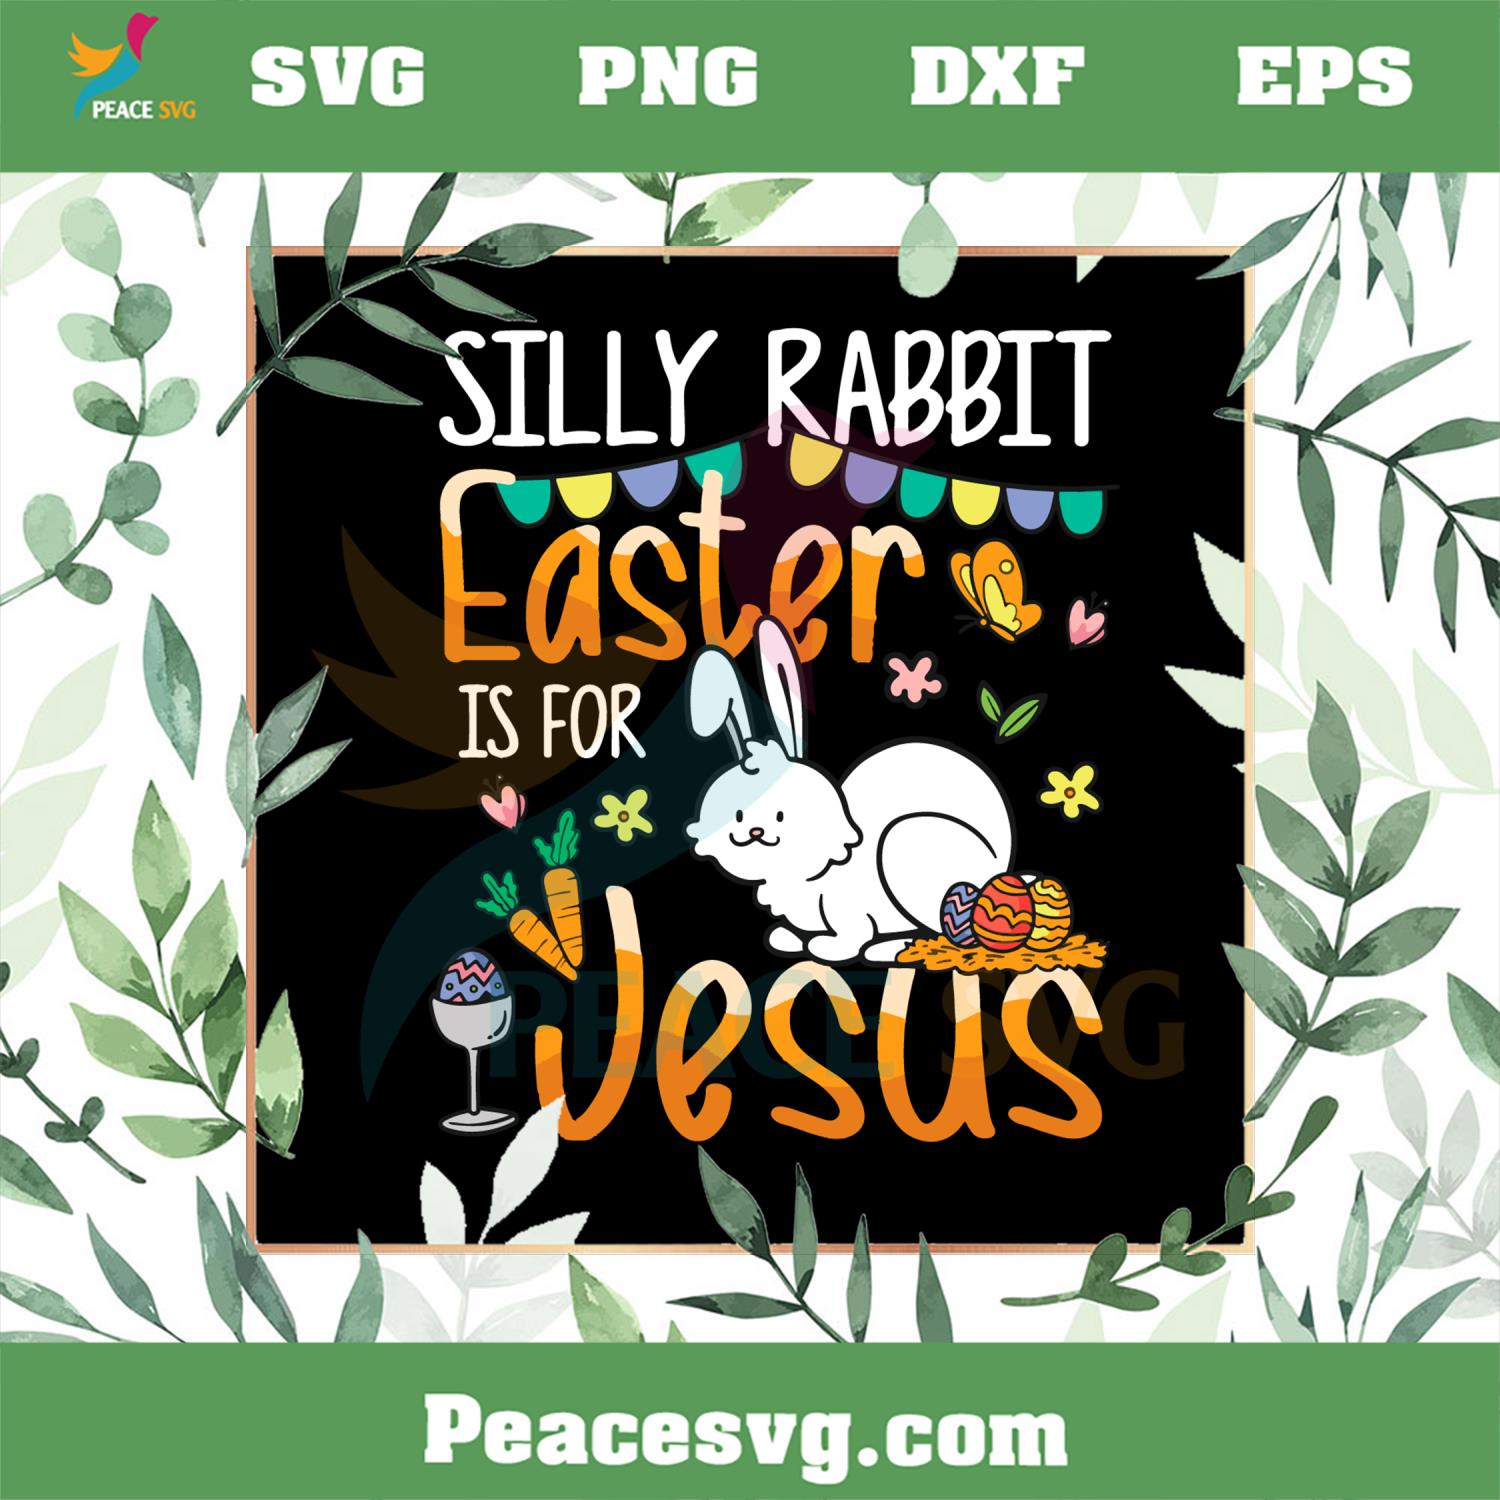 Silly Rabbit Easter Is For Jesus Funny Bunny Easter Day Svg Cutting Files